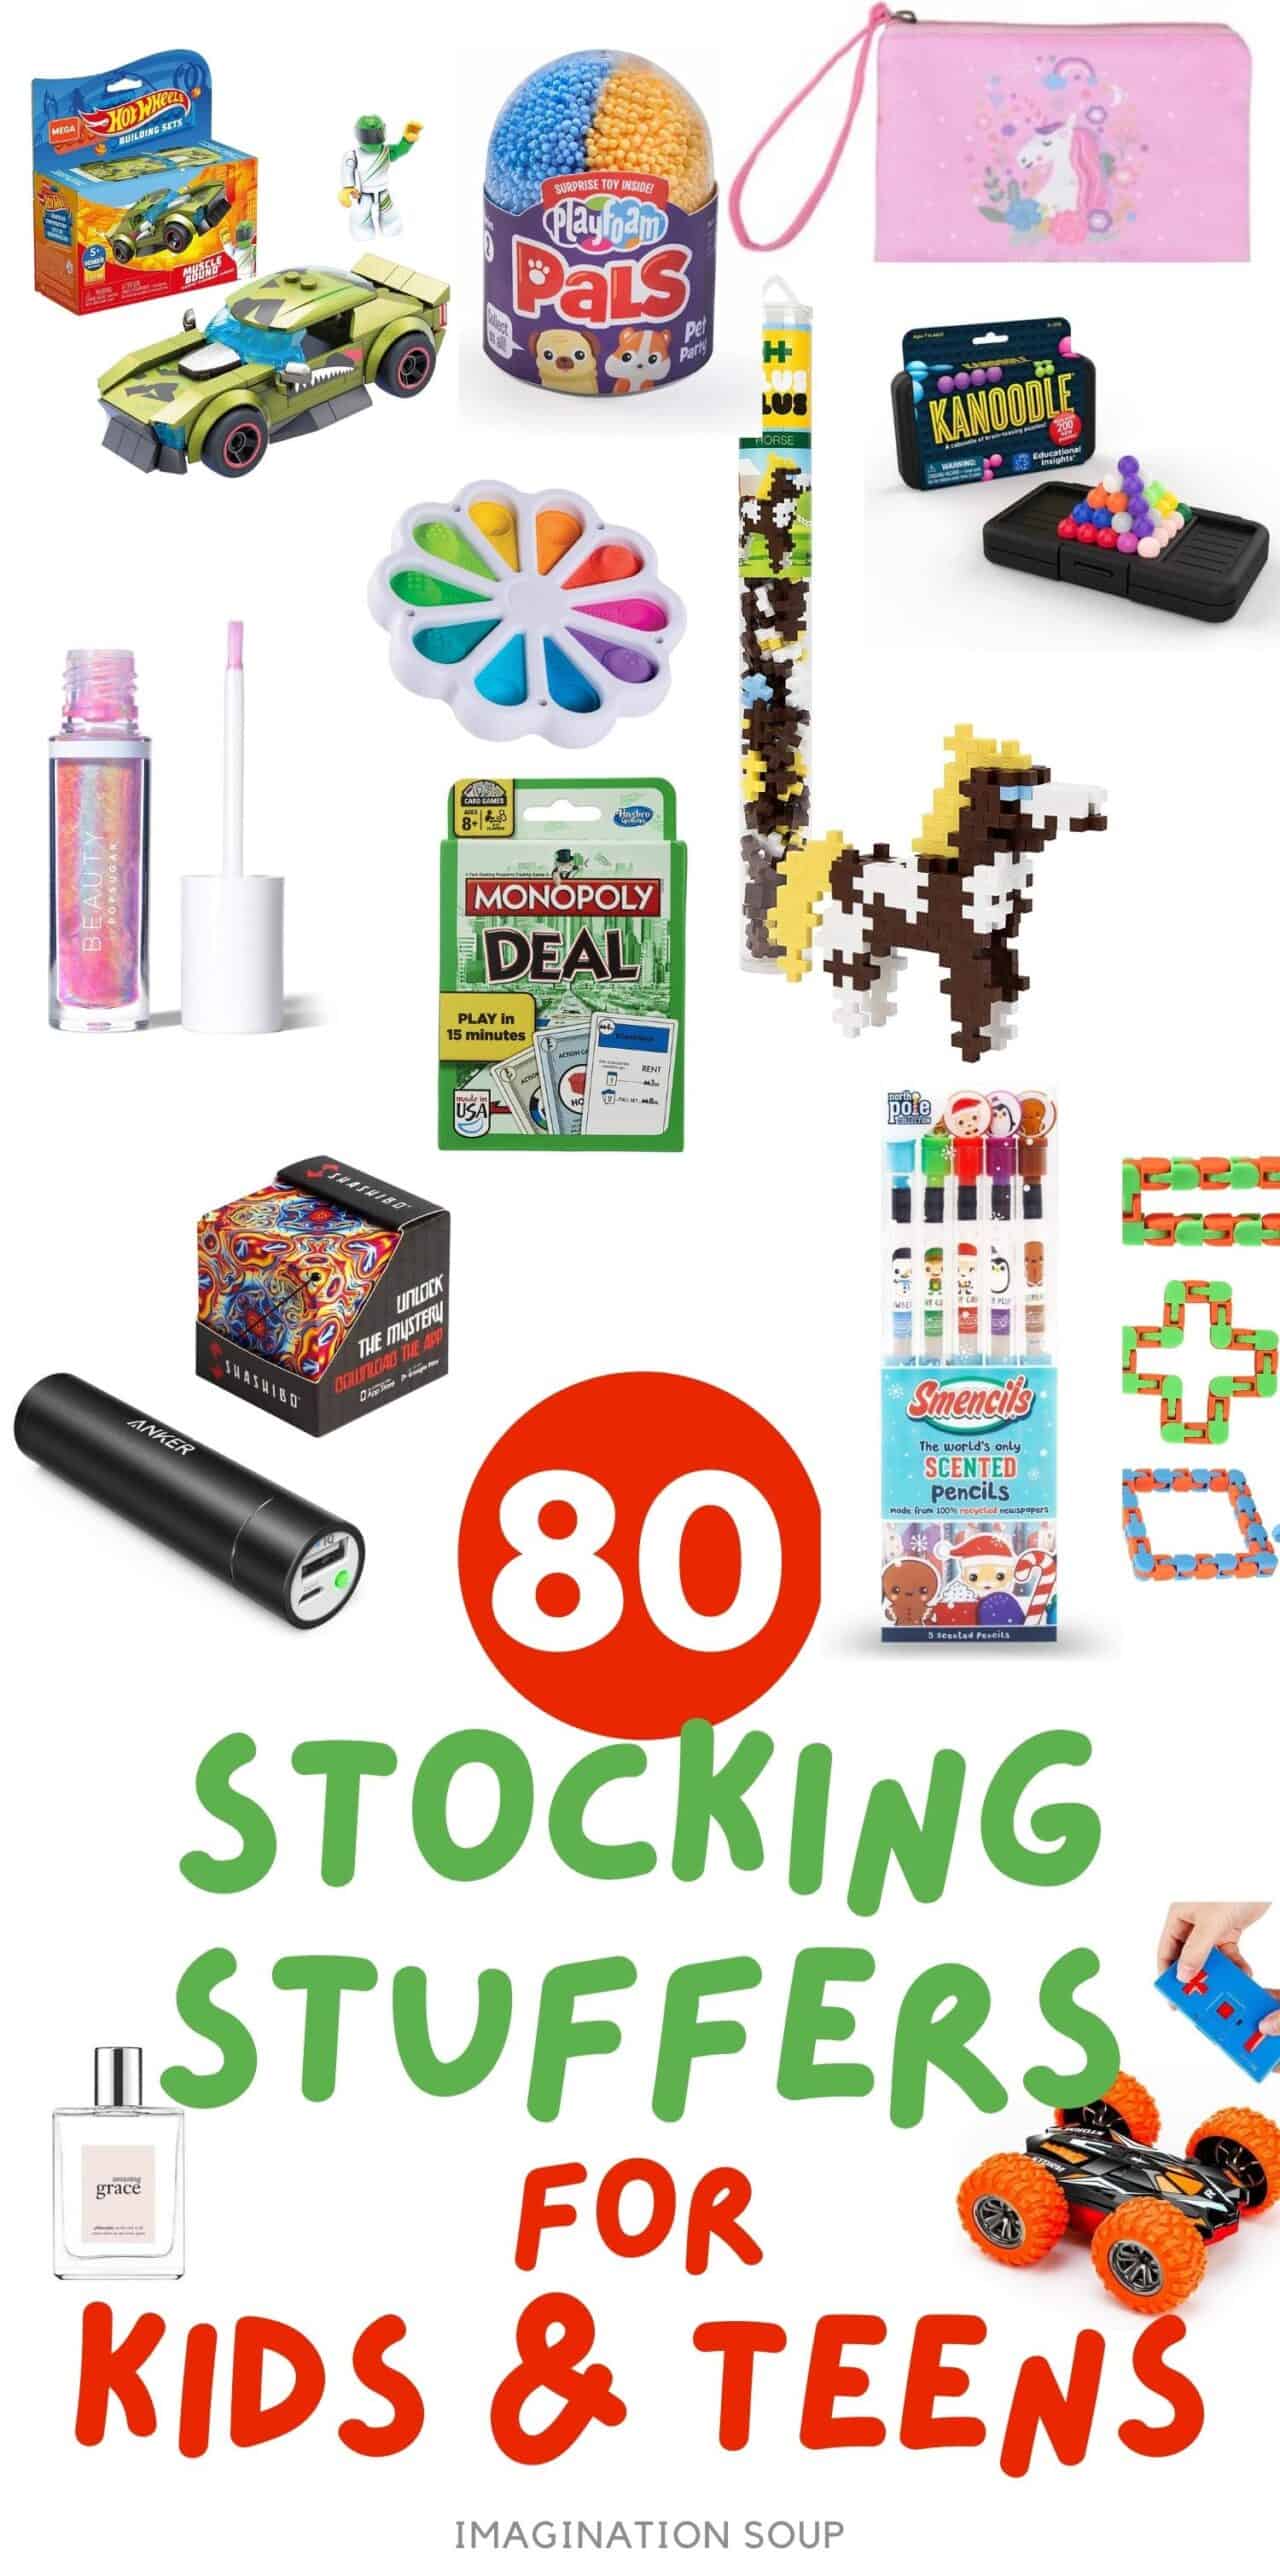 80 stocking stuffer ideas for kids and teens